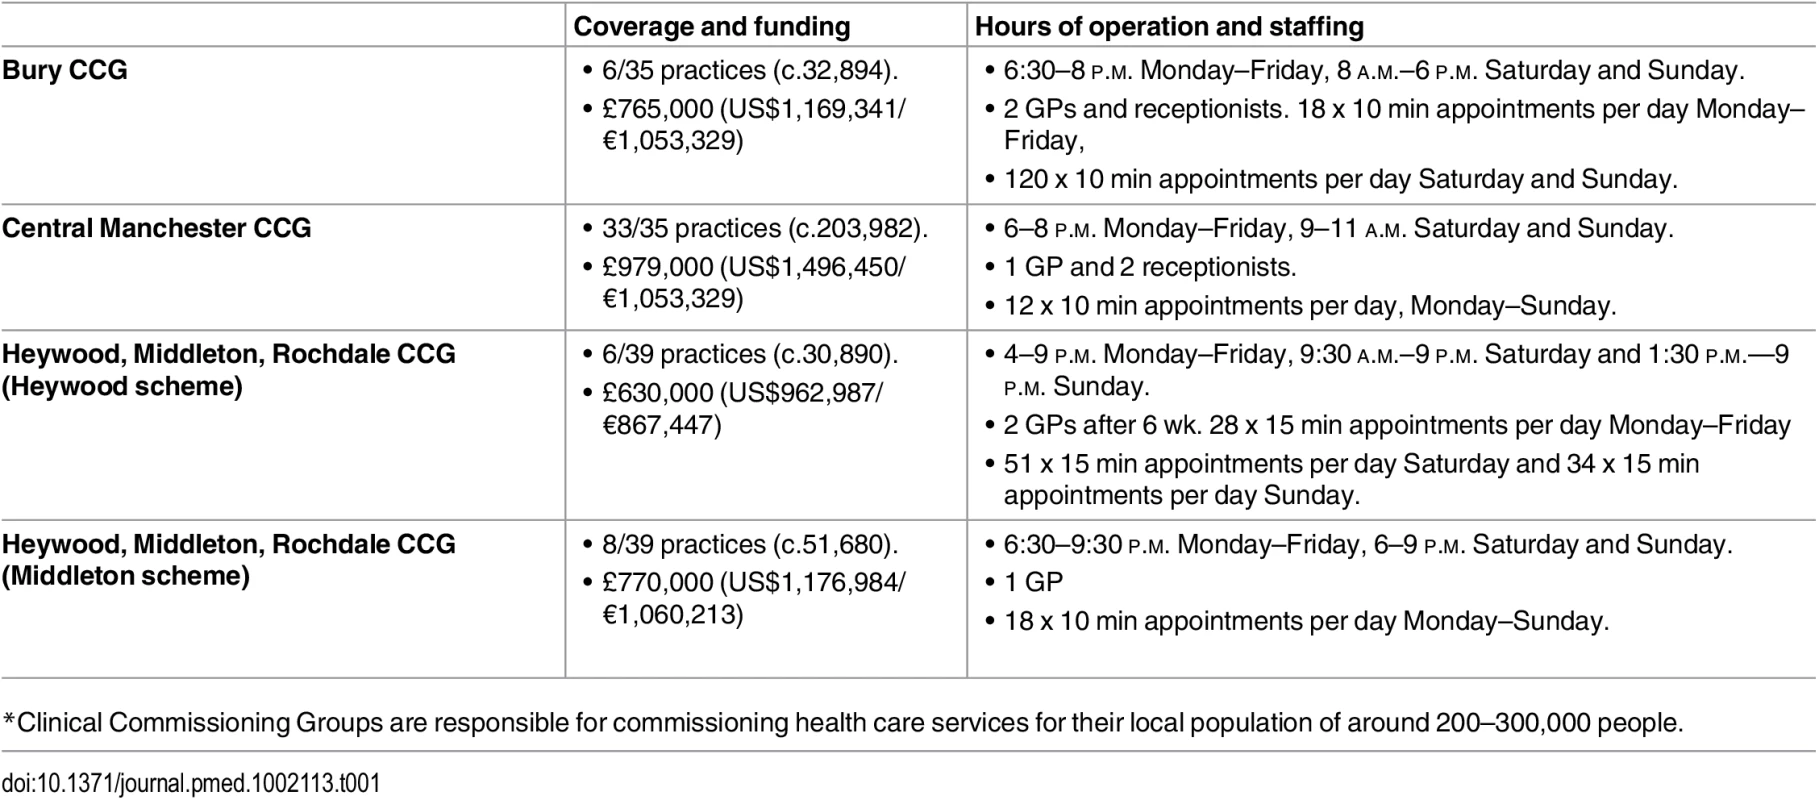 Intervention description: Enhanced access to “out-of-hours” primary care in each intervention practice Clinical Commissioning Group<em class=&quot;ref&quot;>*</em>.